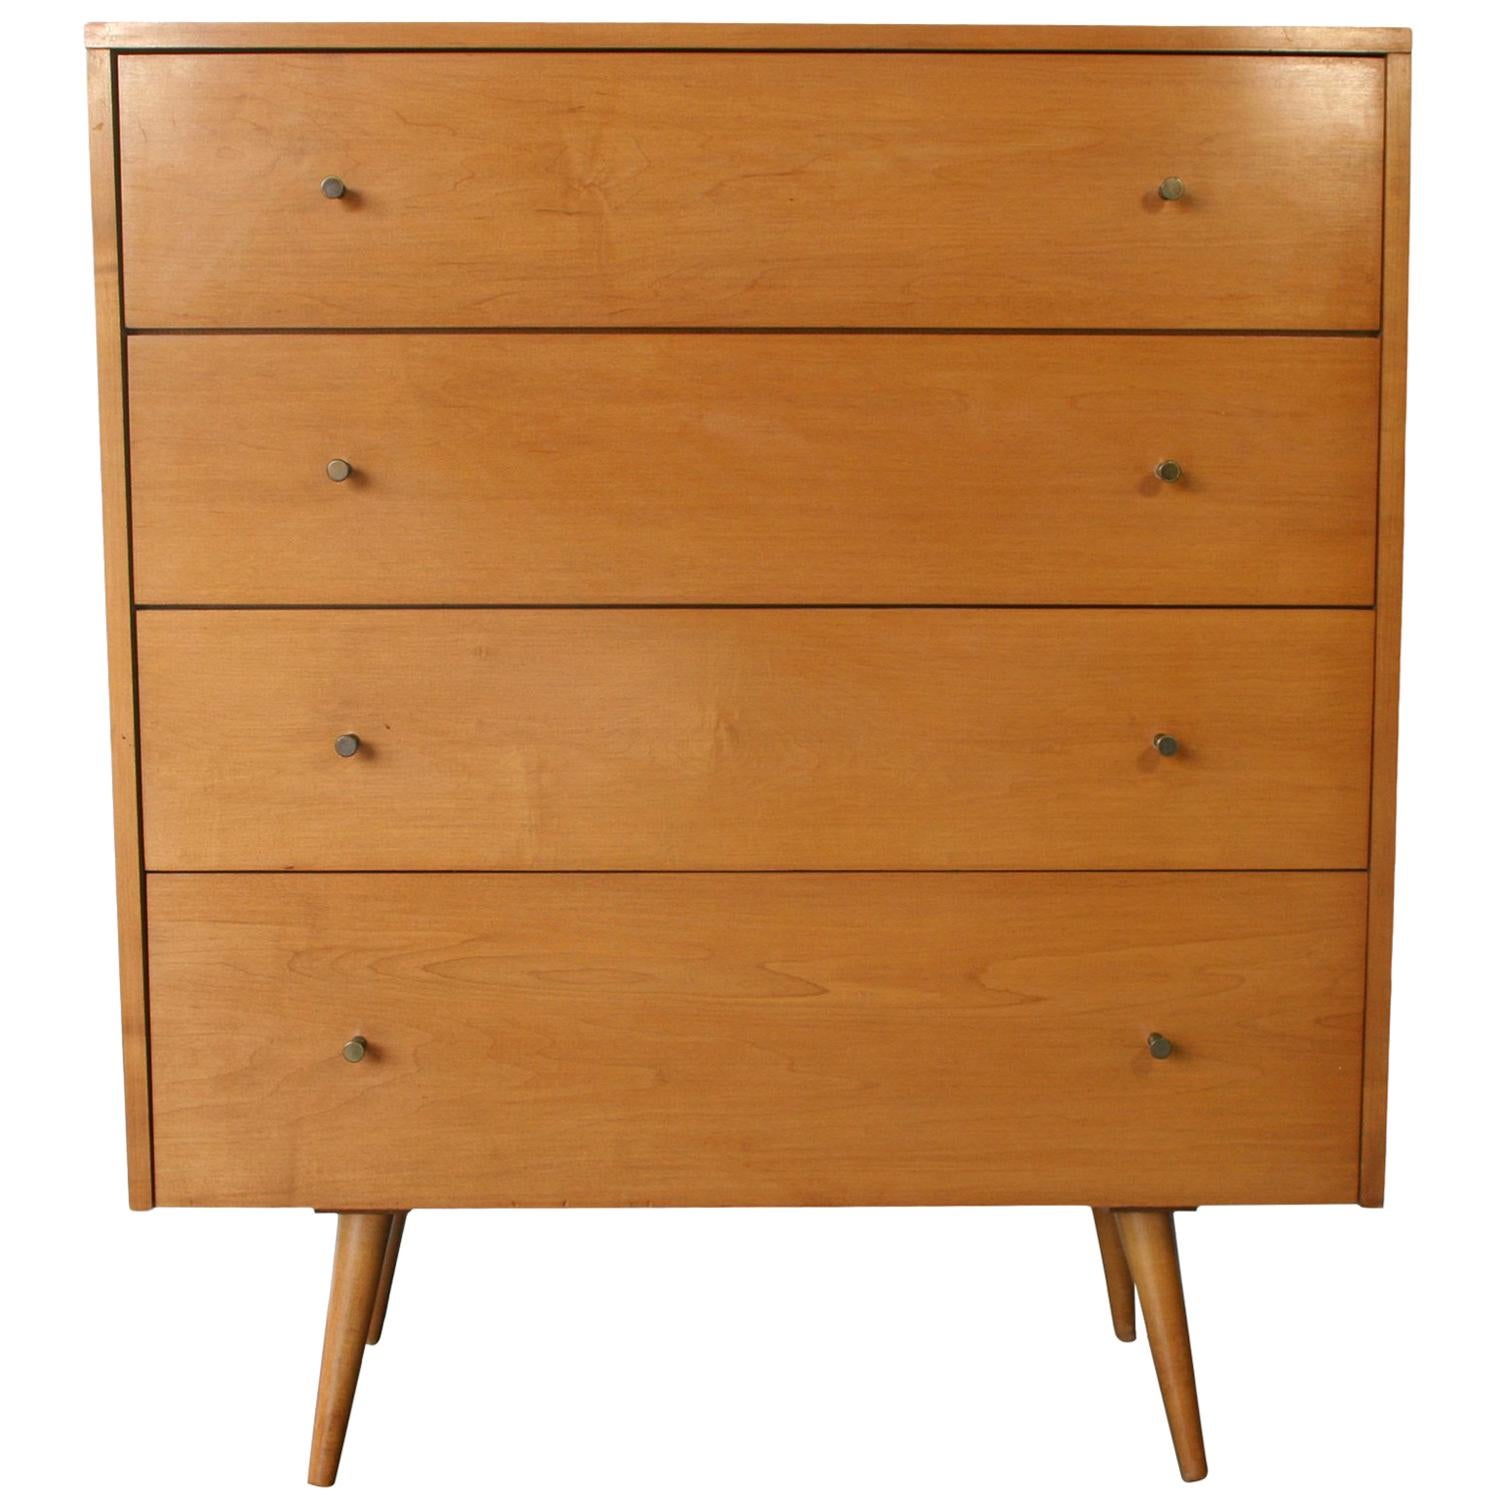 Midcentury Tall Dresser by Paul McCobb circa 1950 Planner Group #1501 Blonde For Sale